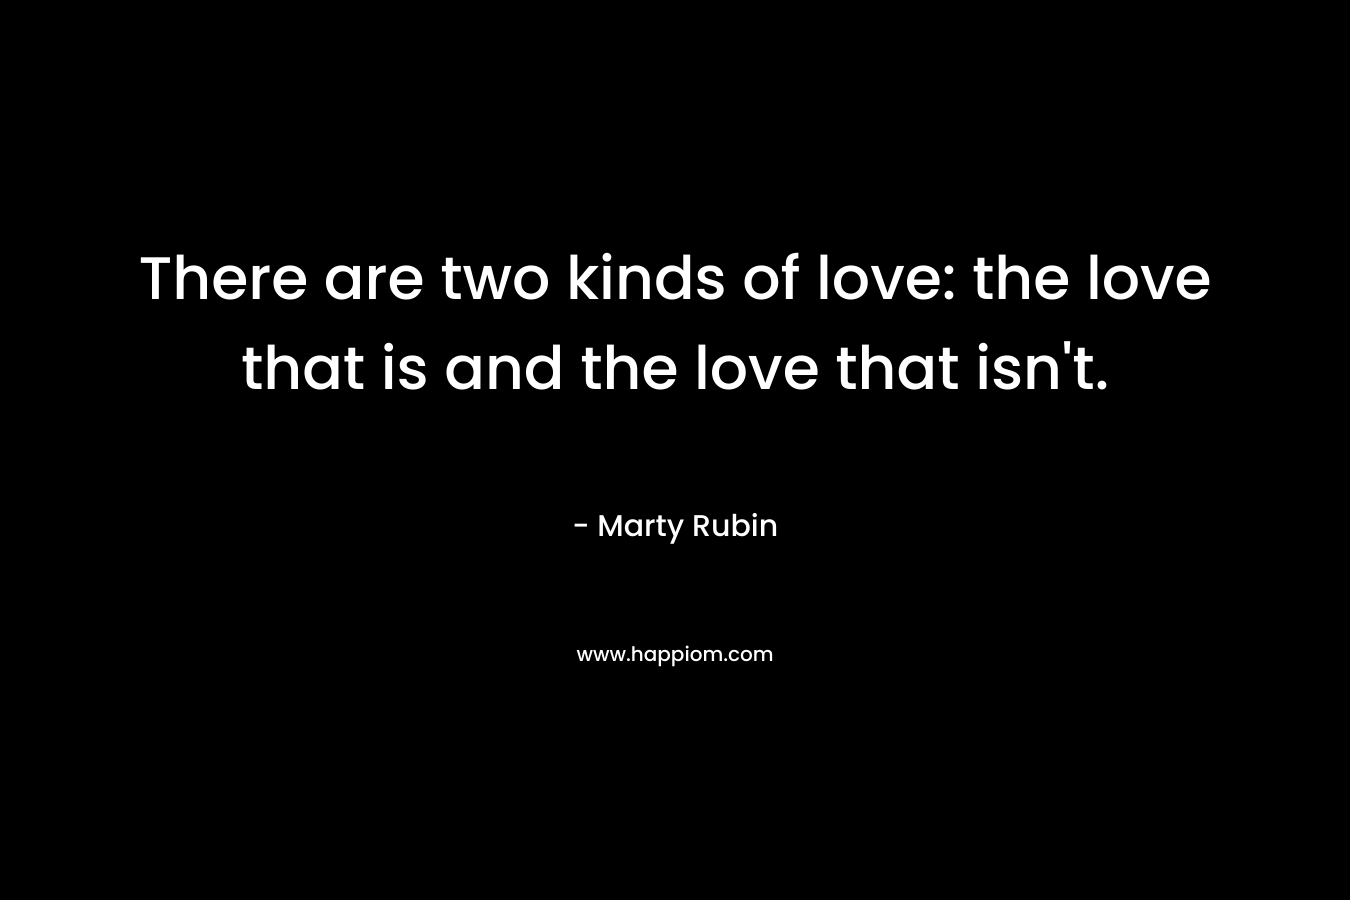 There are two kinds of love: the love that is and the love that isn't.